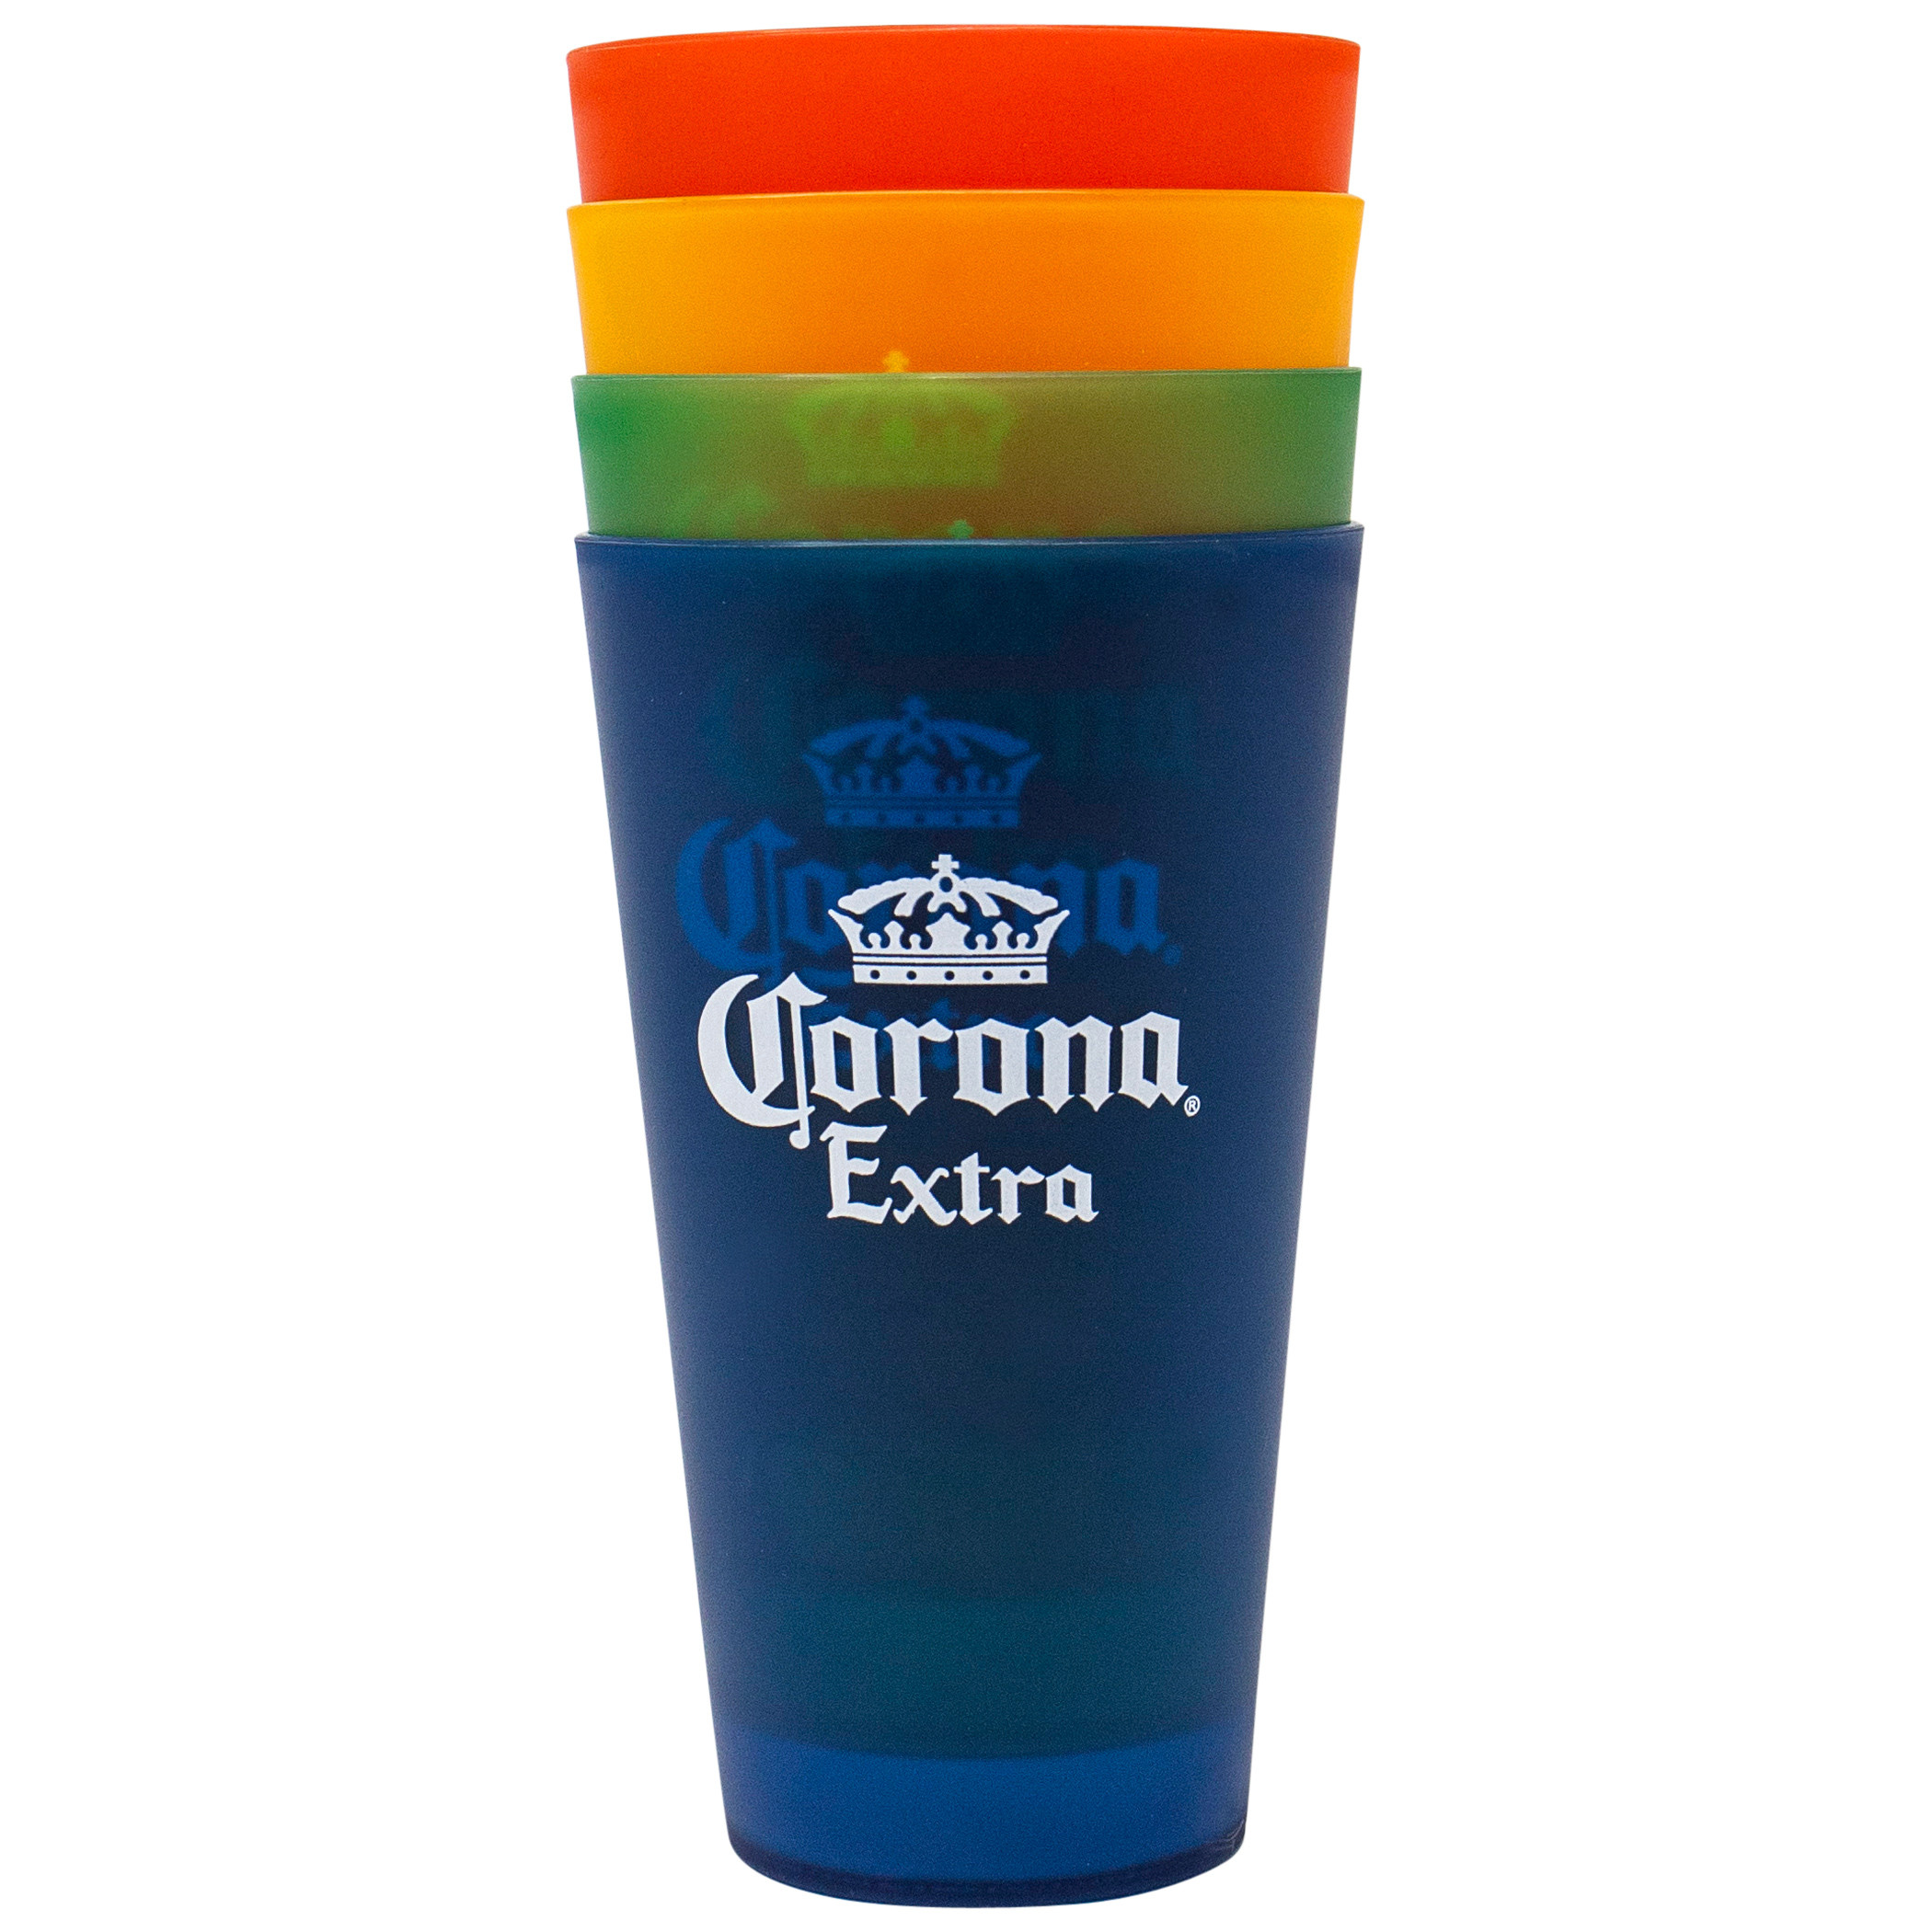 Corona Extra 4-Pack Colored 20 Ounce Cups